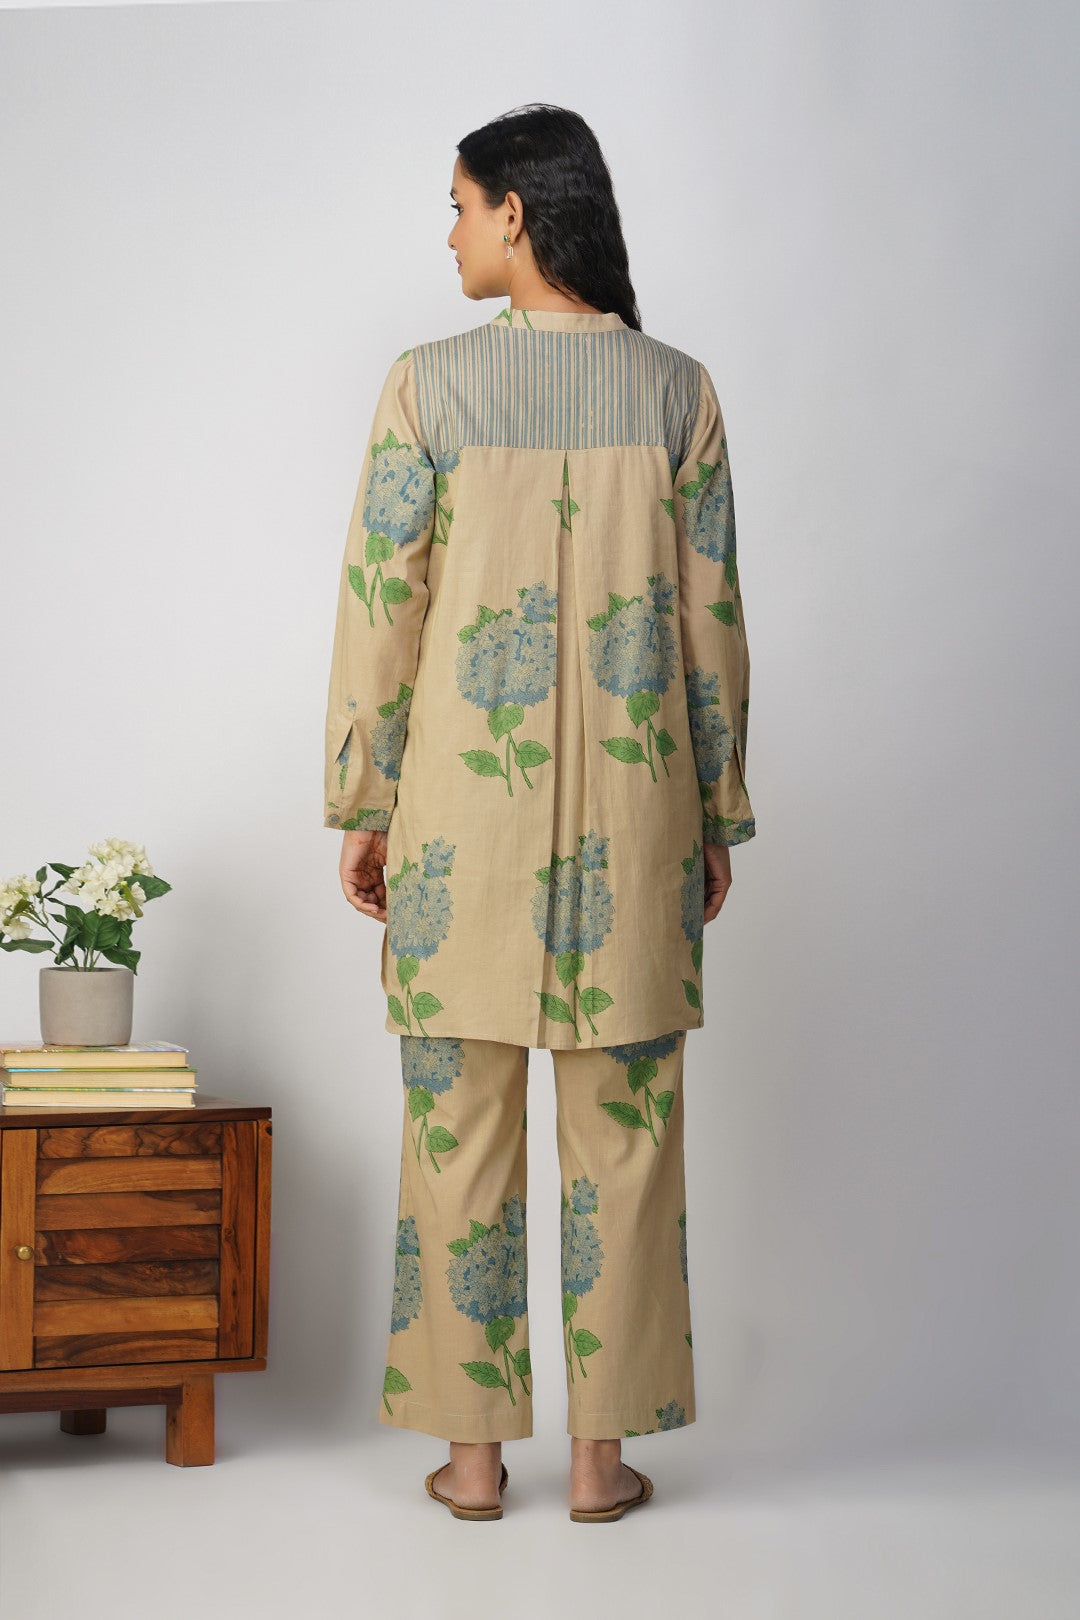 Blue Hydrangea Block Printed Tunic With Floral Pants